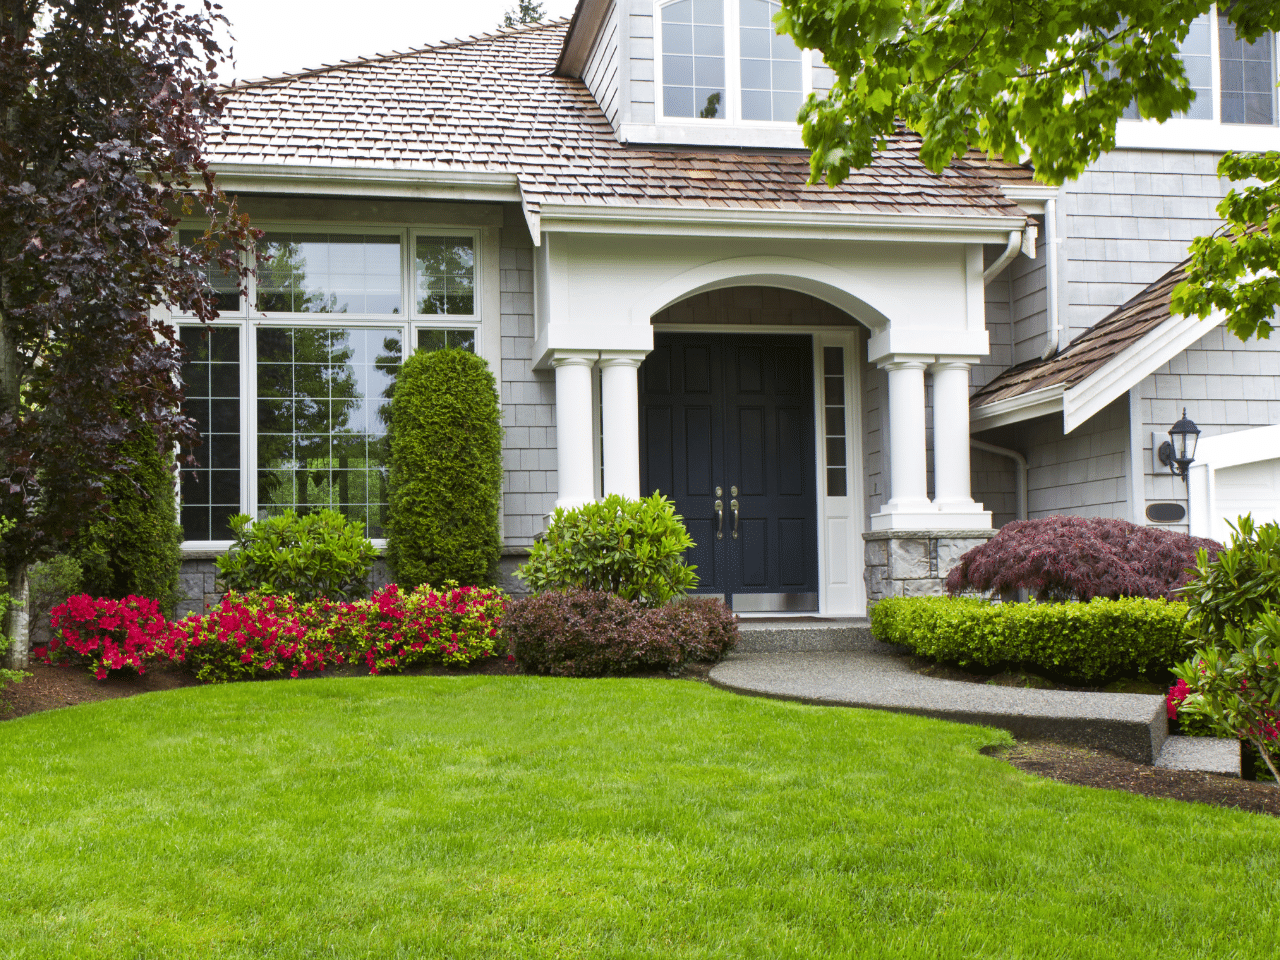 Front Yard with Beautiful House and Colored Flowers on Bushes